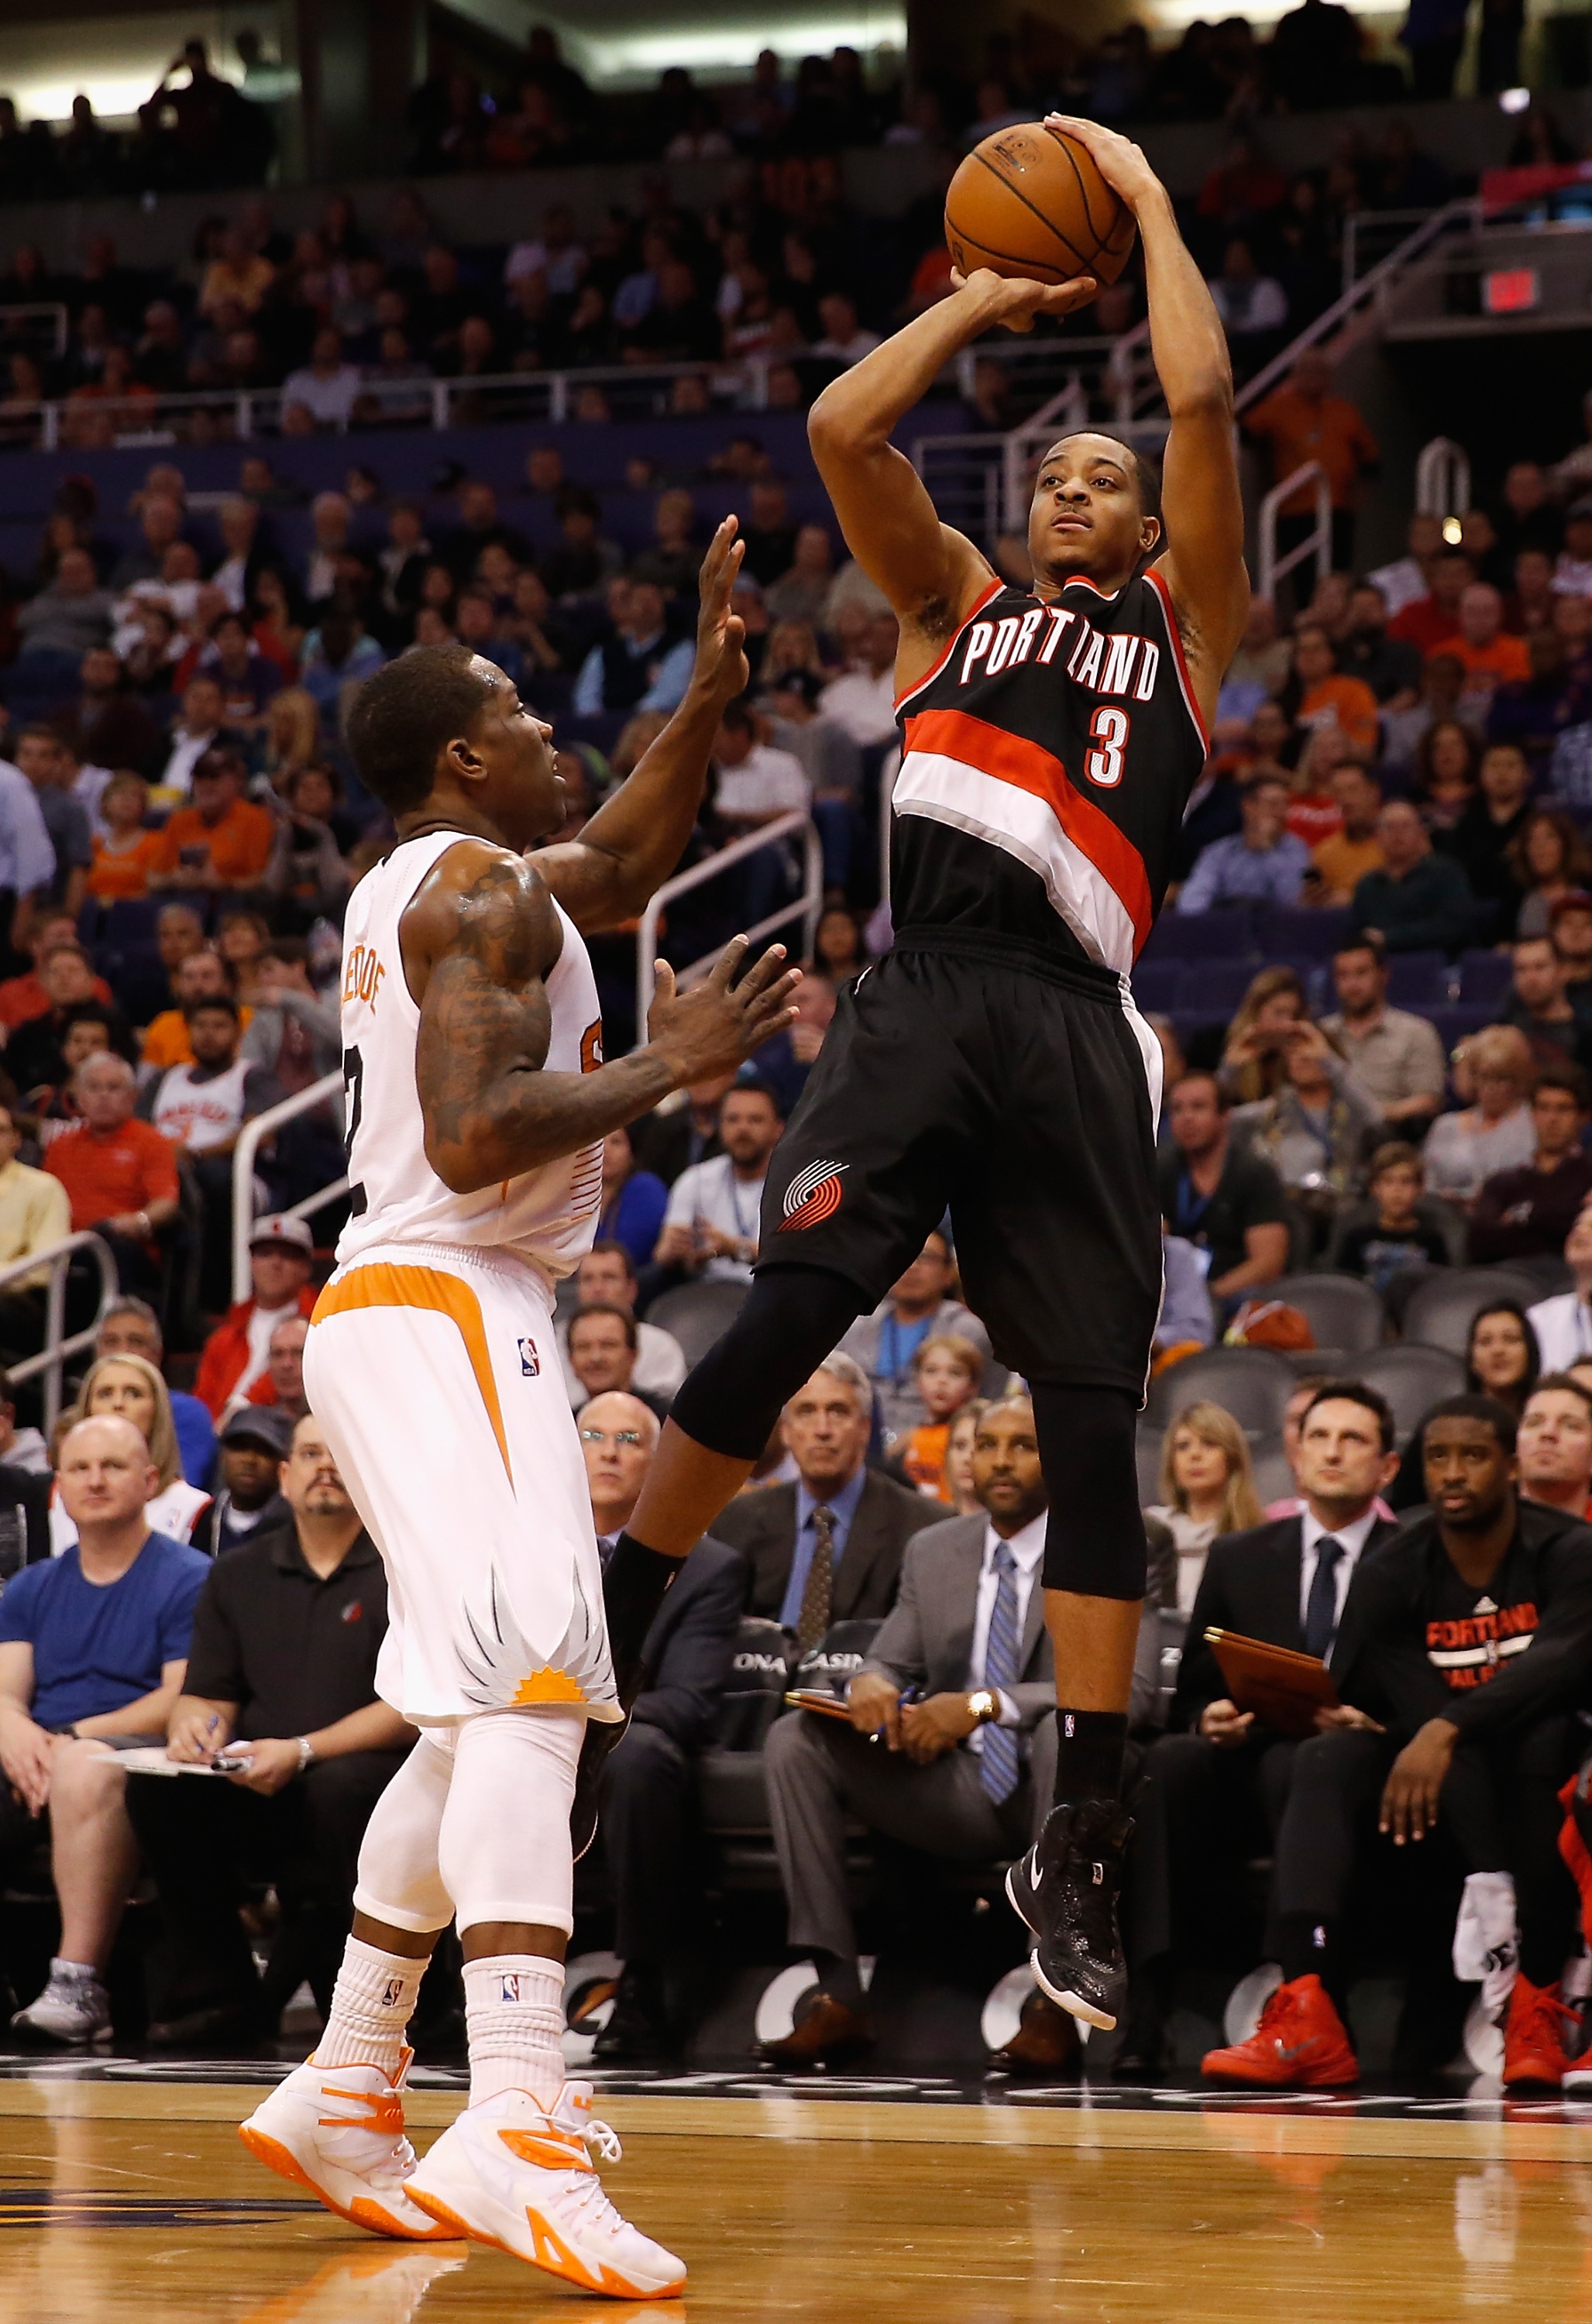 Second-year scorer C.J. McCollum could get a chance to shine. (Christian Petersen/Getty Images)